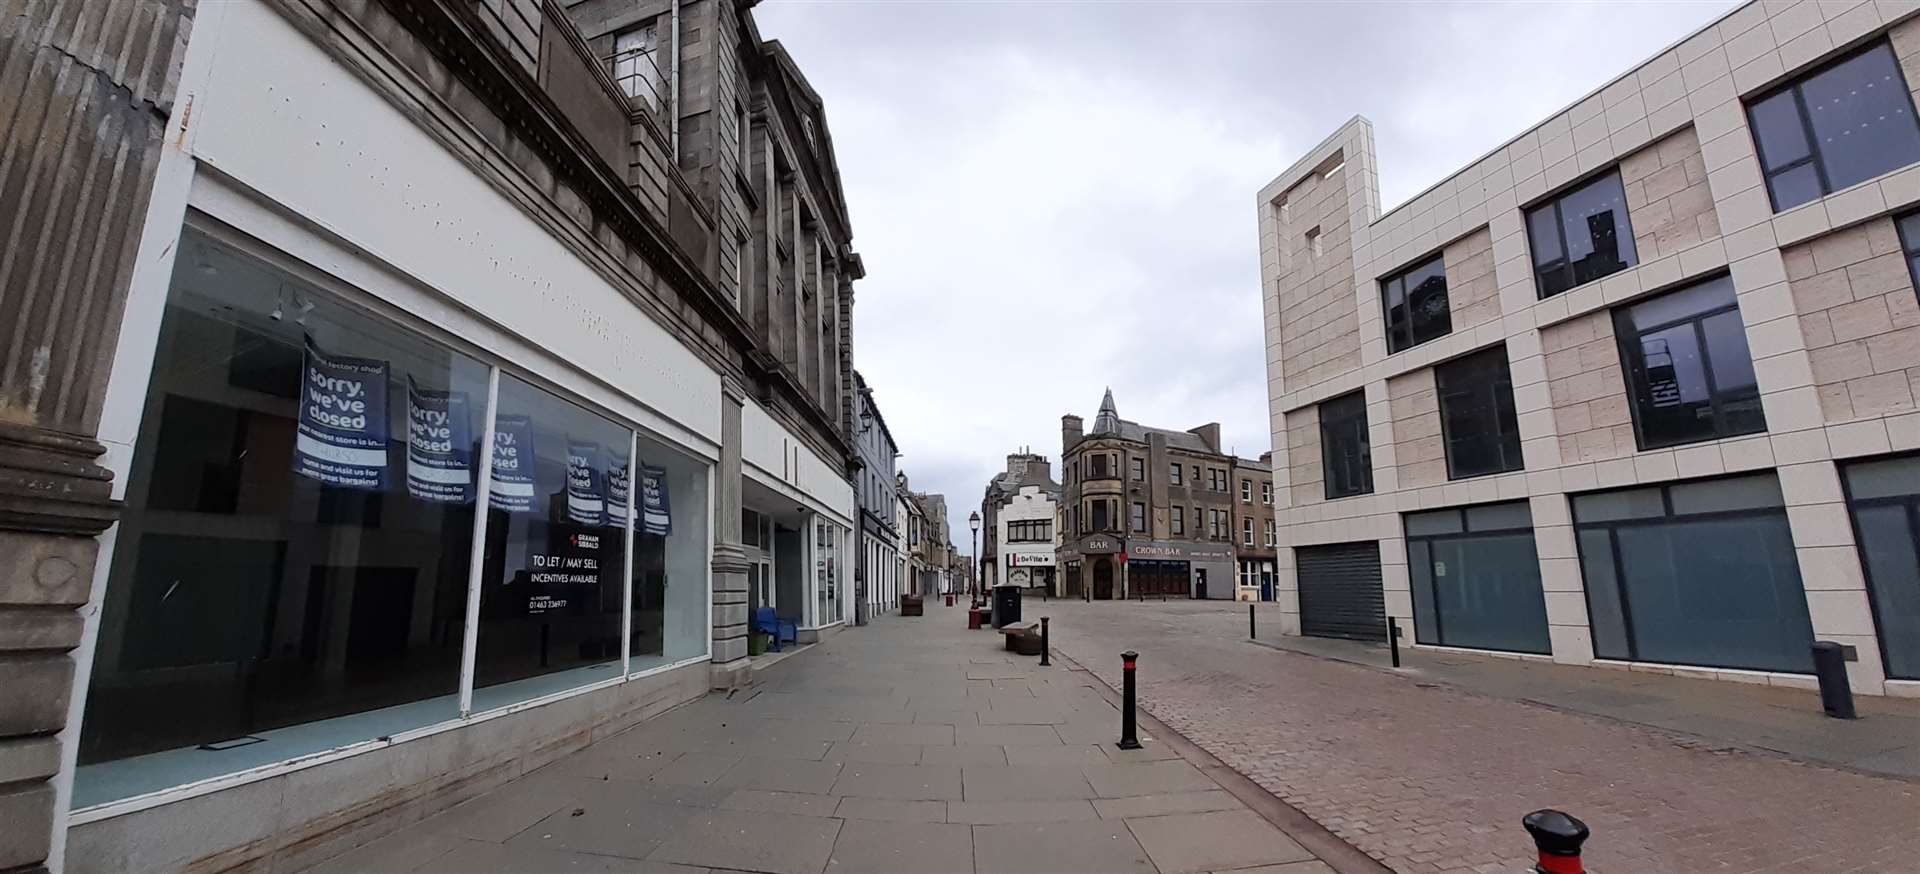 The eastern end of High Street in Wick, empty of people and vehicles during the coronavirus lockdown.